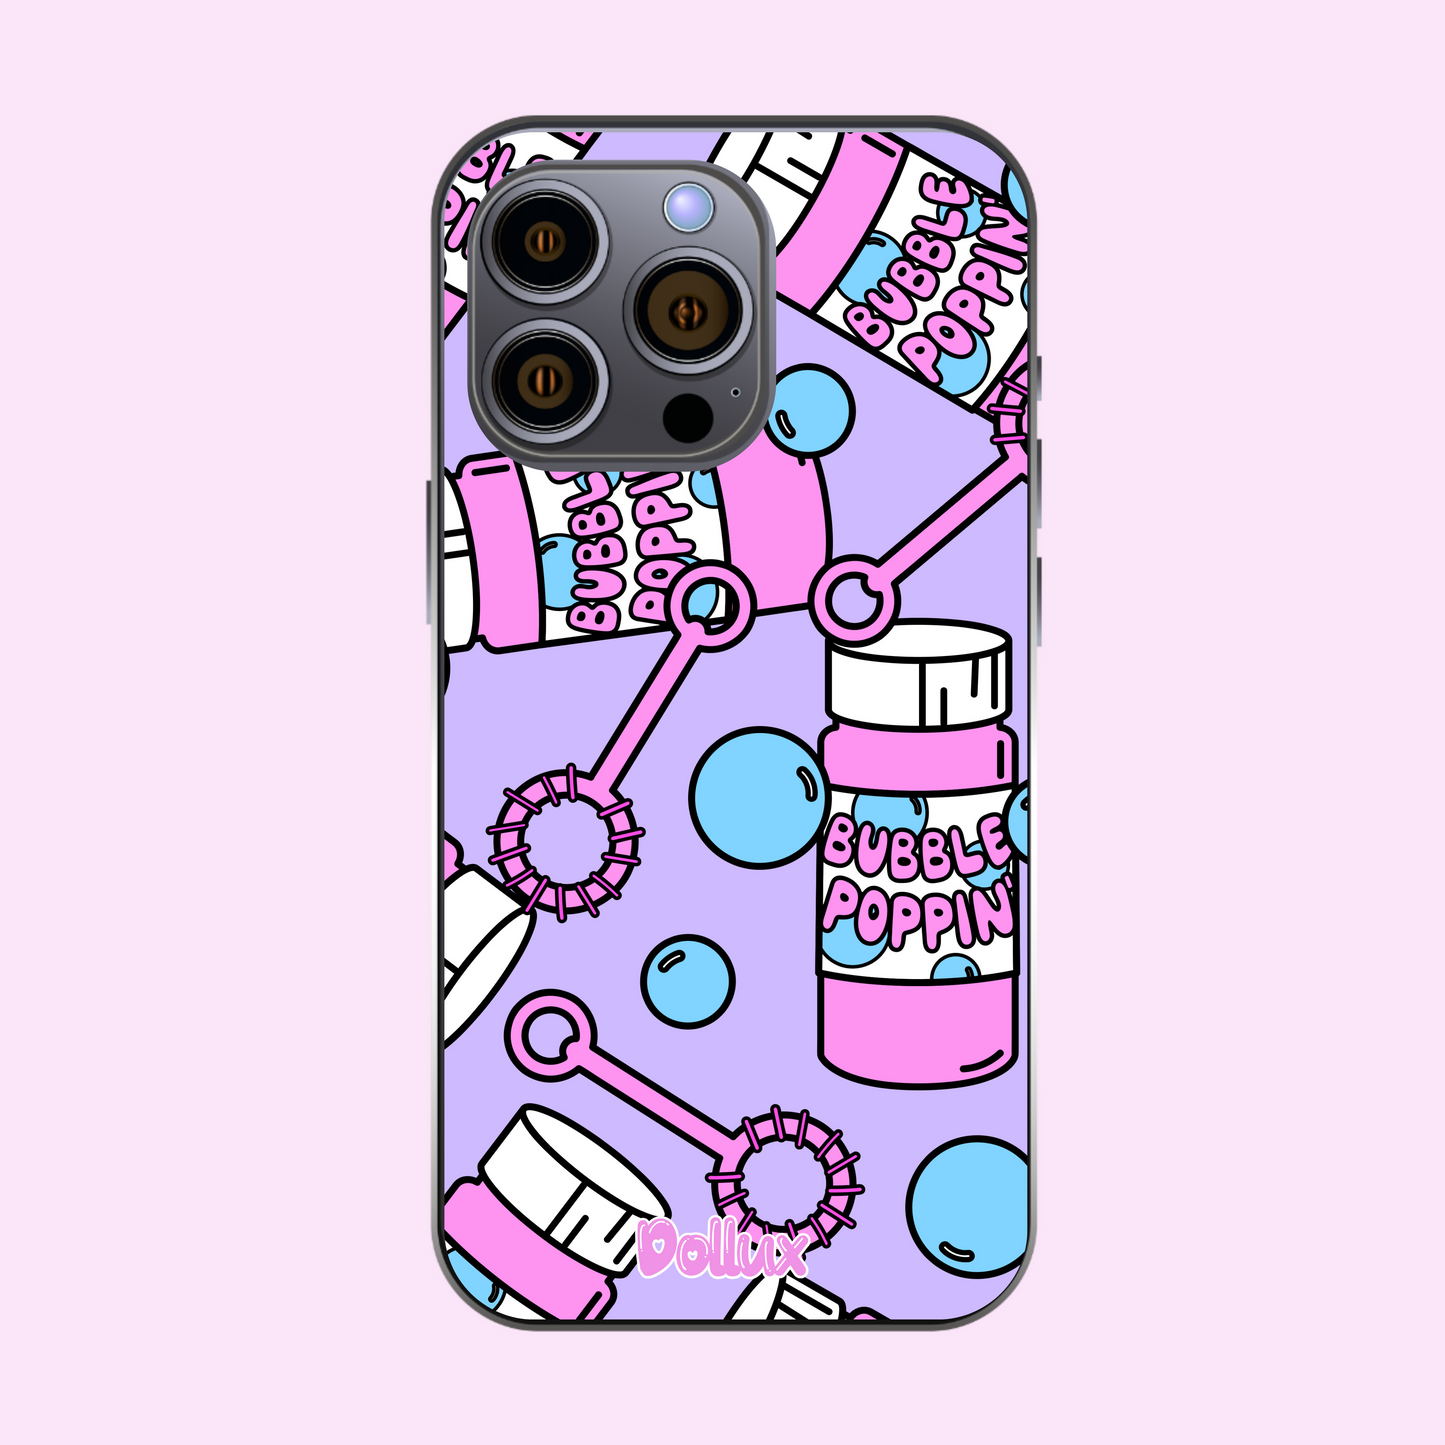 Bubble Poppin iPhone Case